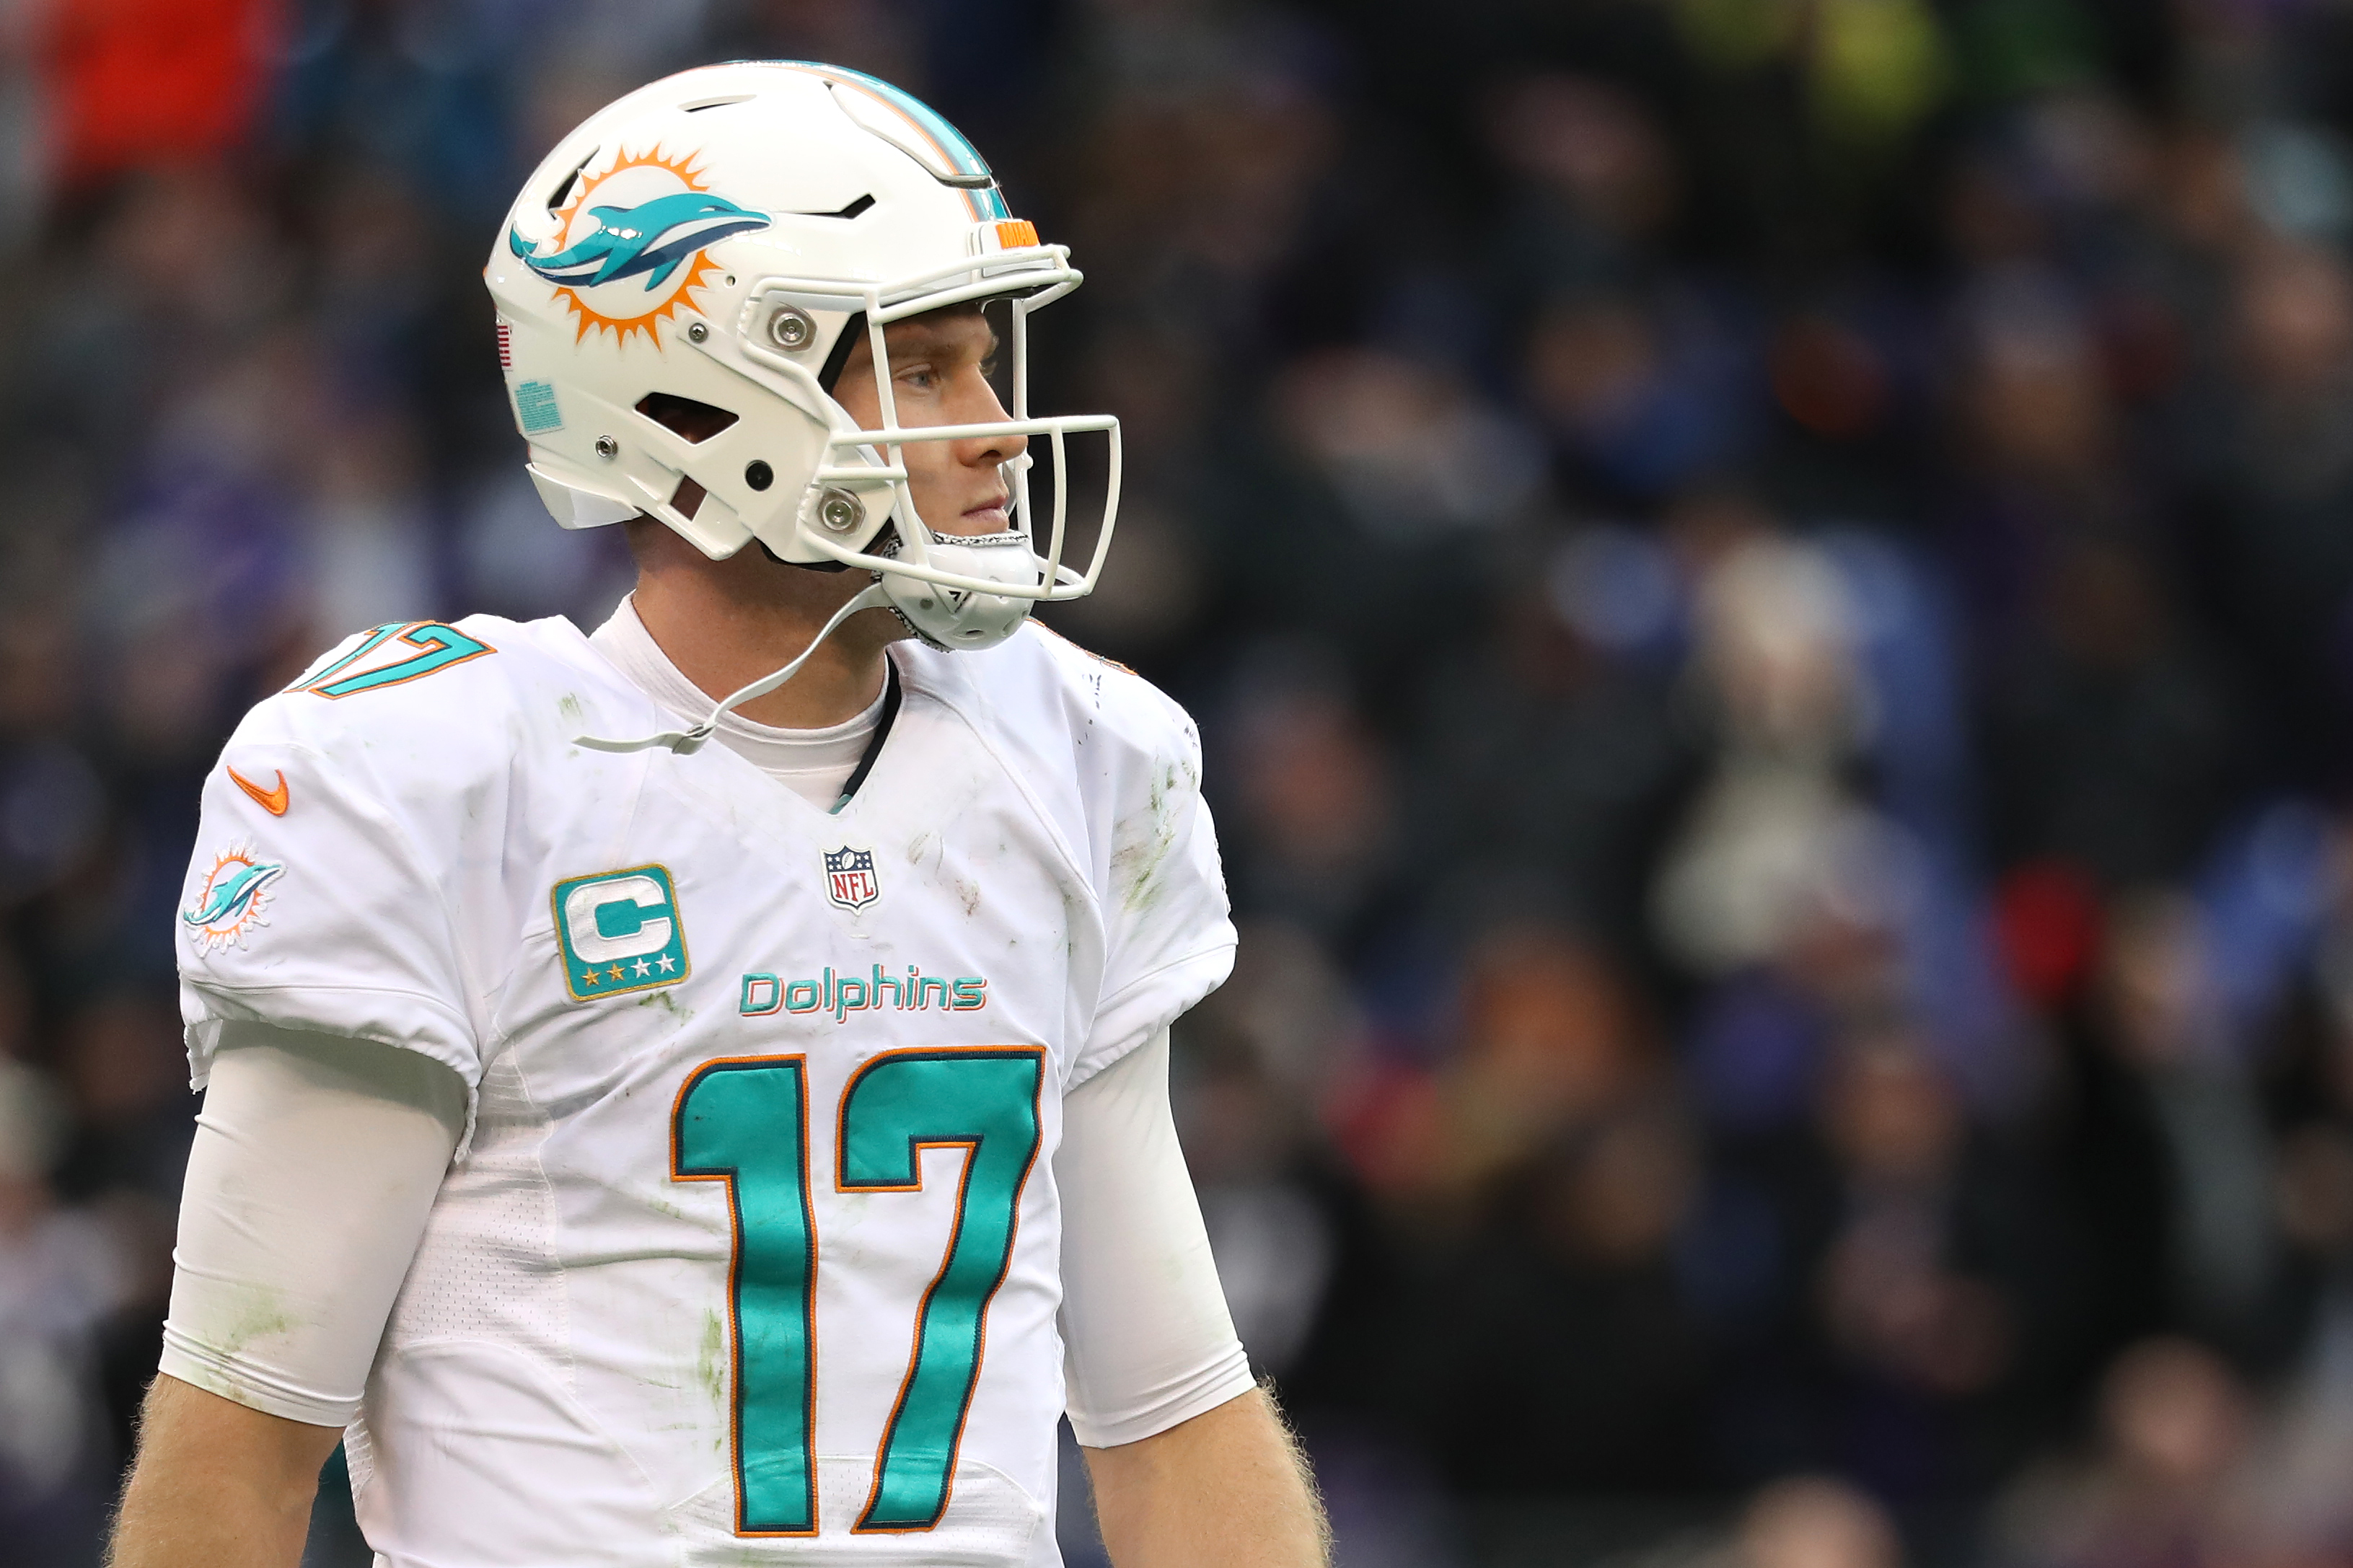 Miami Dolphins: Ryan Tannehill's legacy hangs in balance of 2018